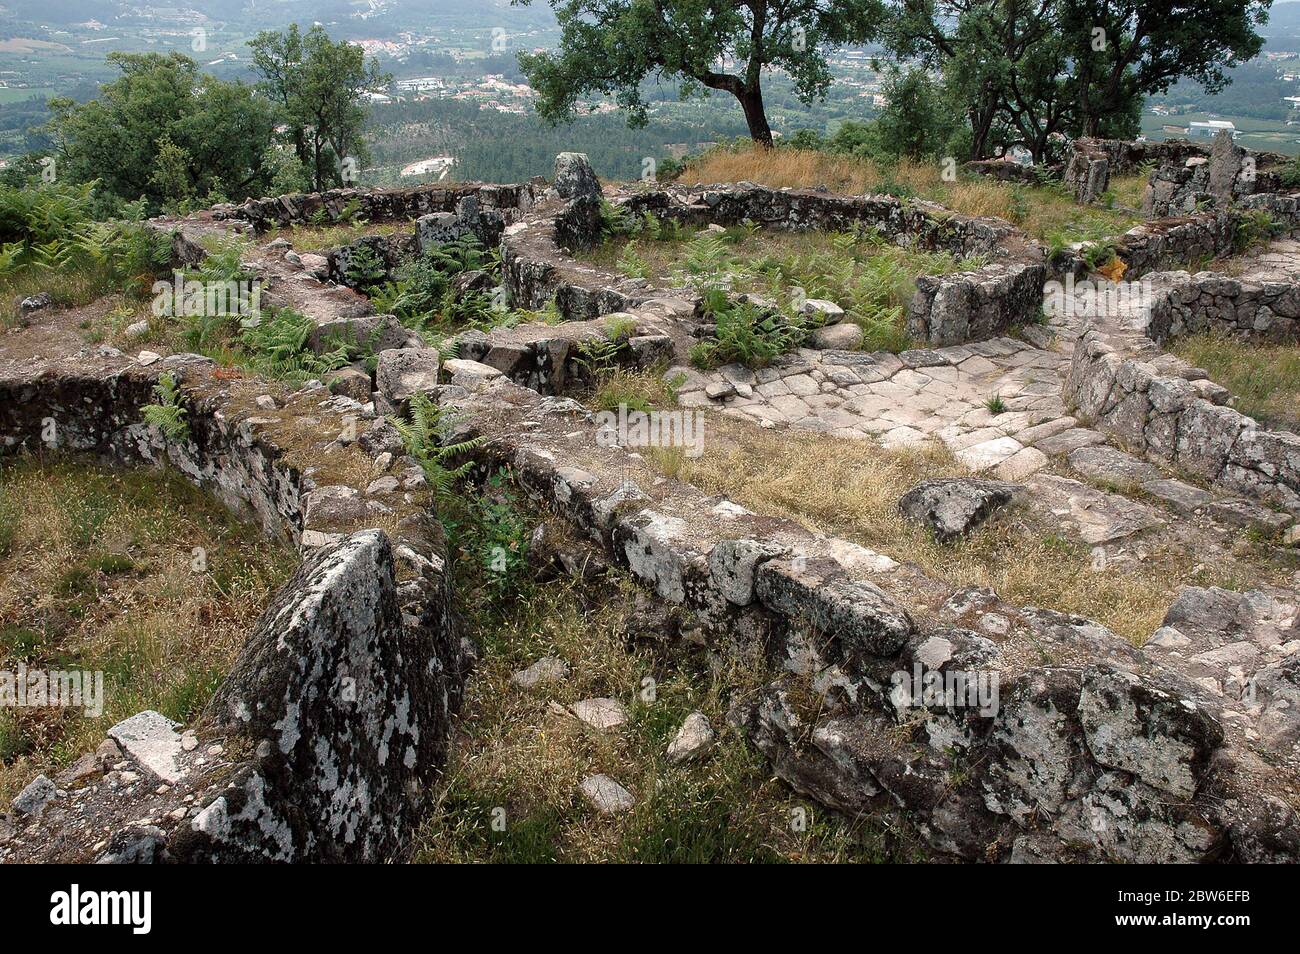 The lattice grid of walls that divide the structures at Citania de Briteiros archaeological site of the Castro culture showing house ruins and stone paving located in Guimaraes northern Portugal Stock Photo